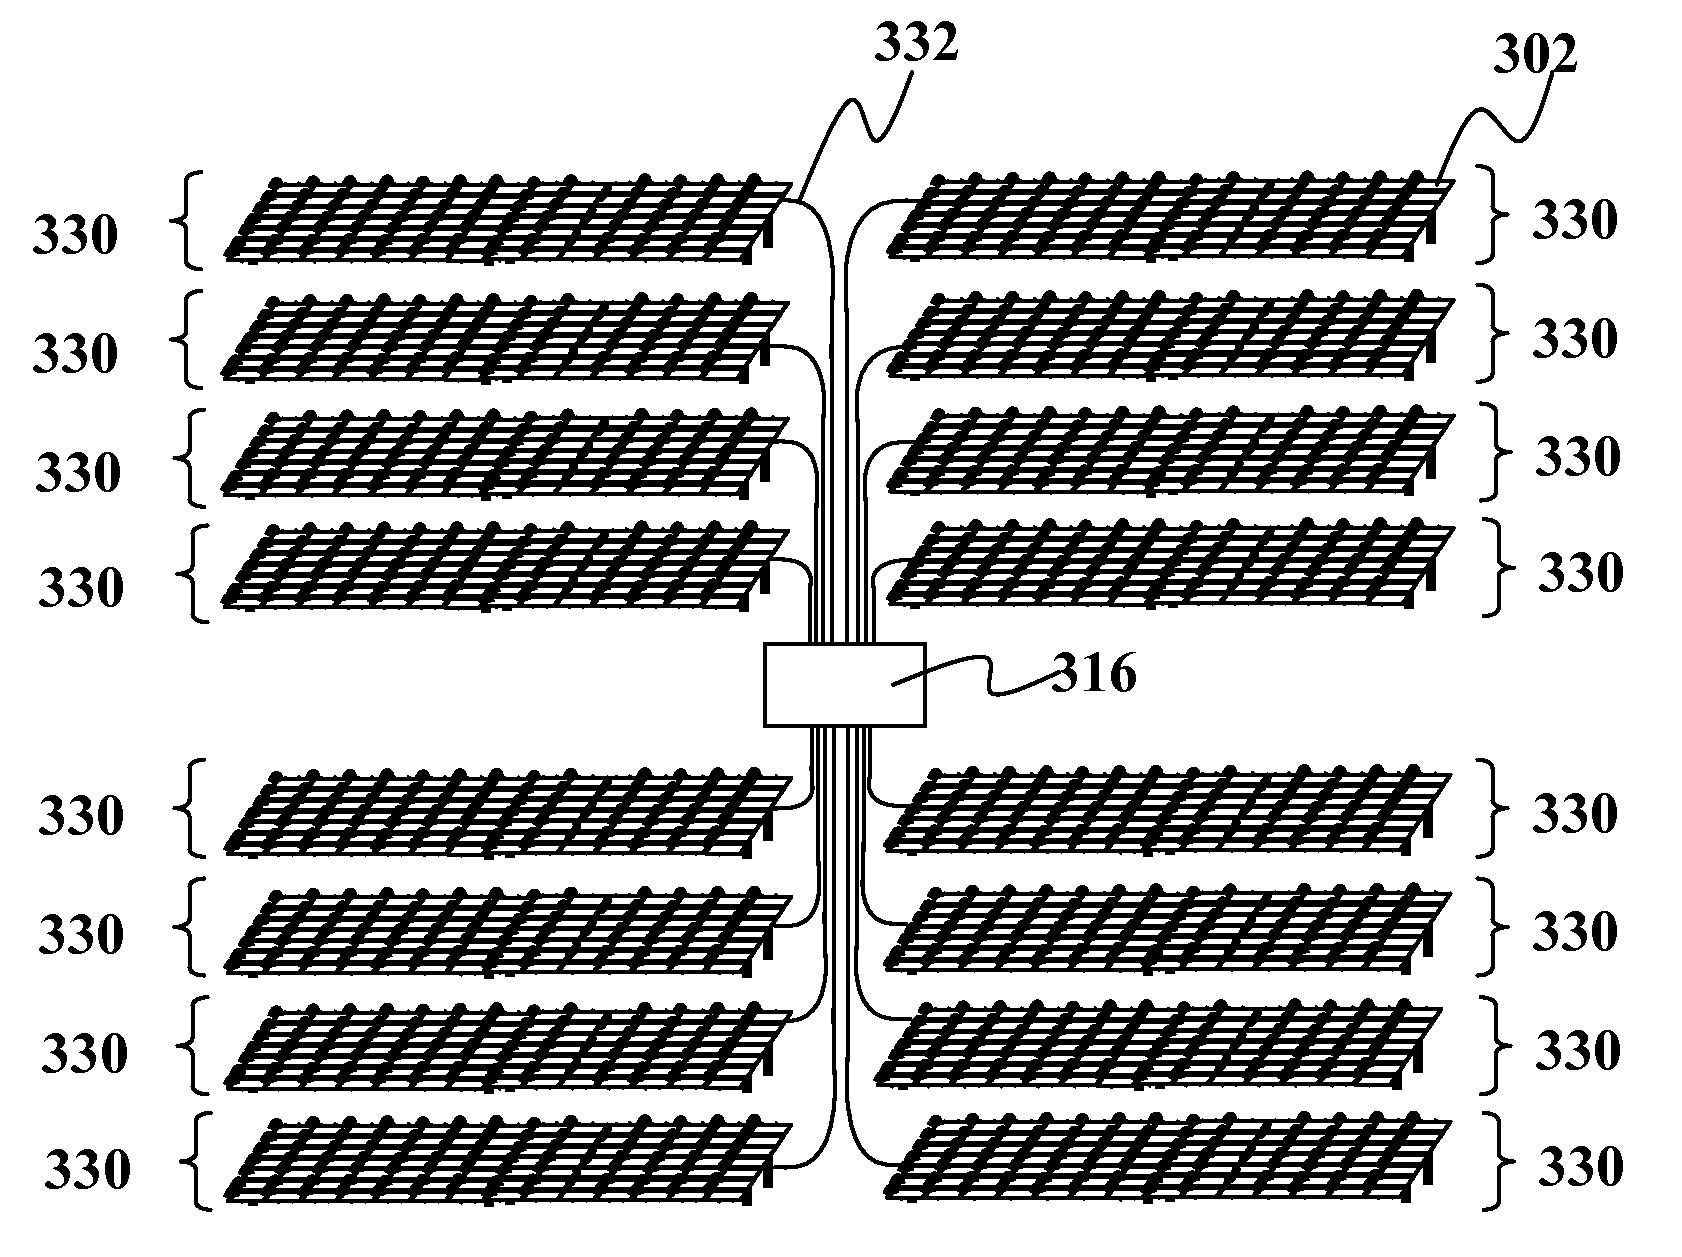 Methods and Devices for Large-Scale Solar Installations